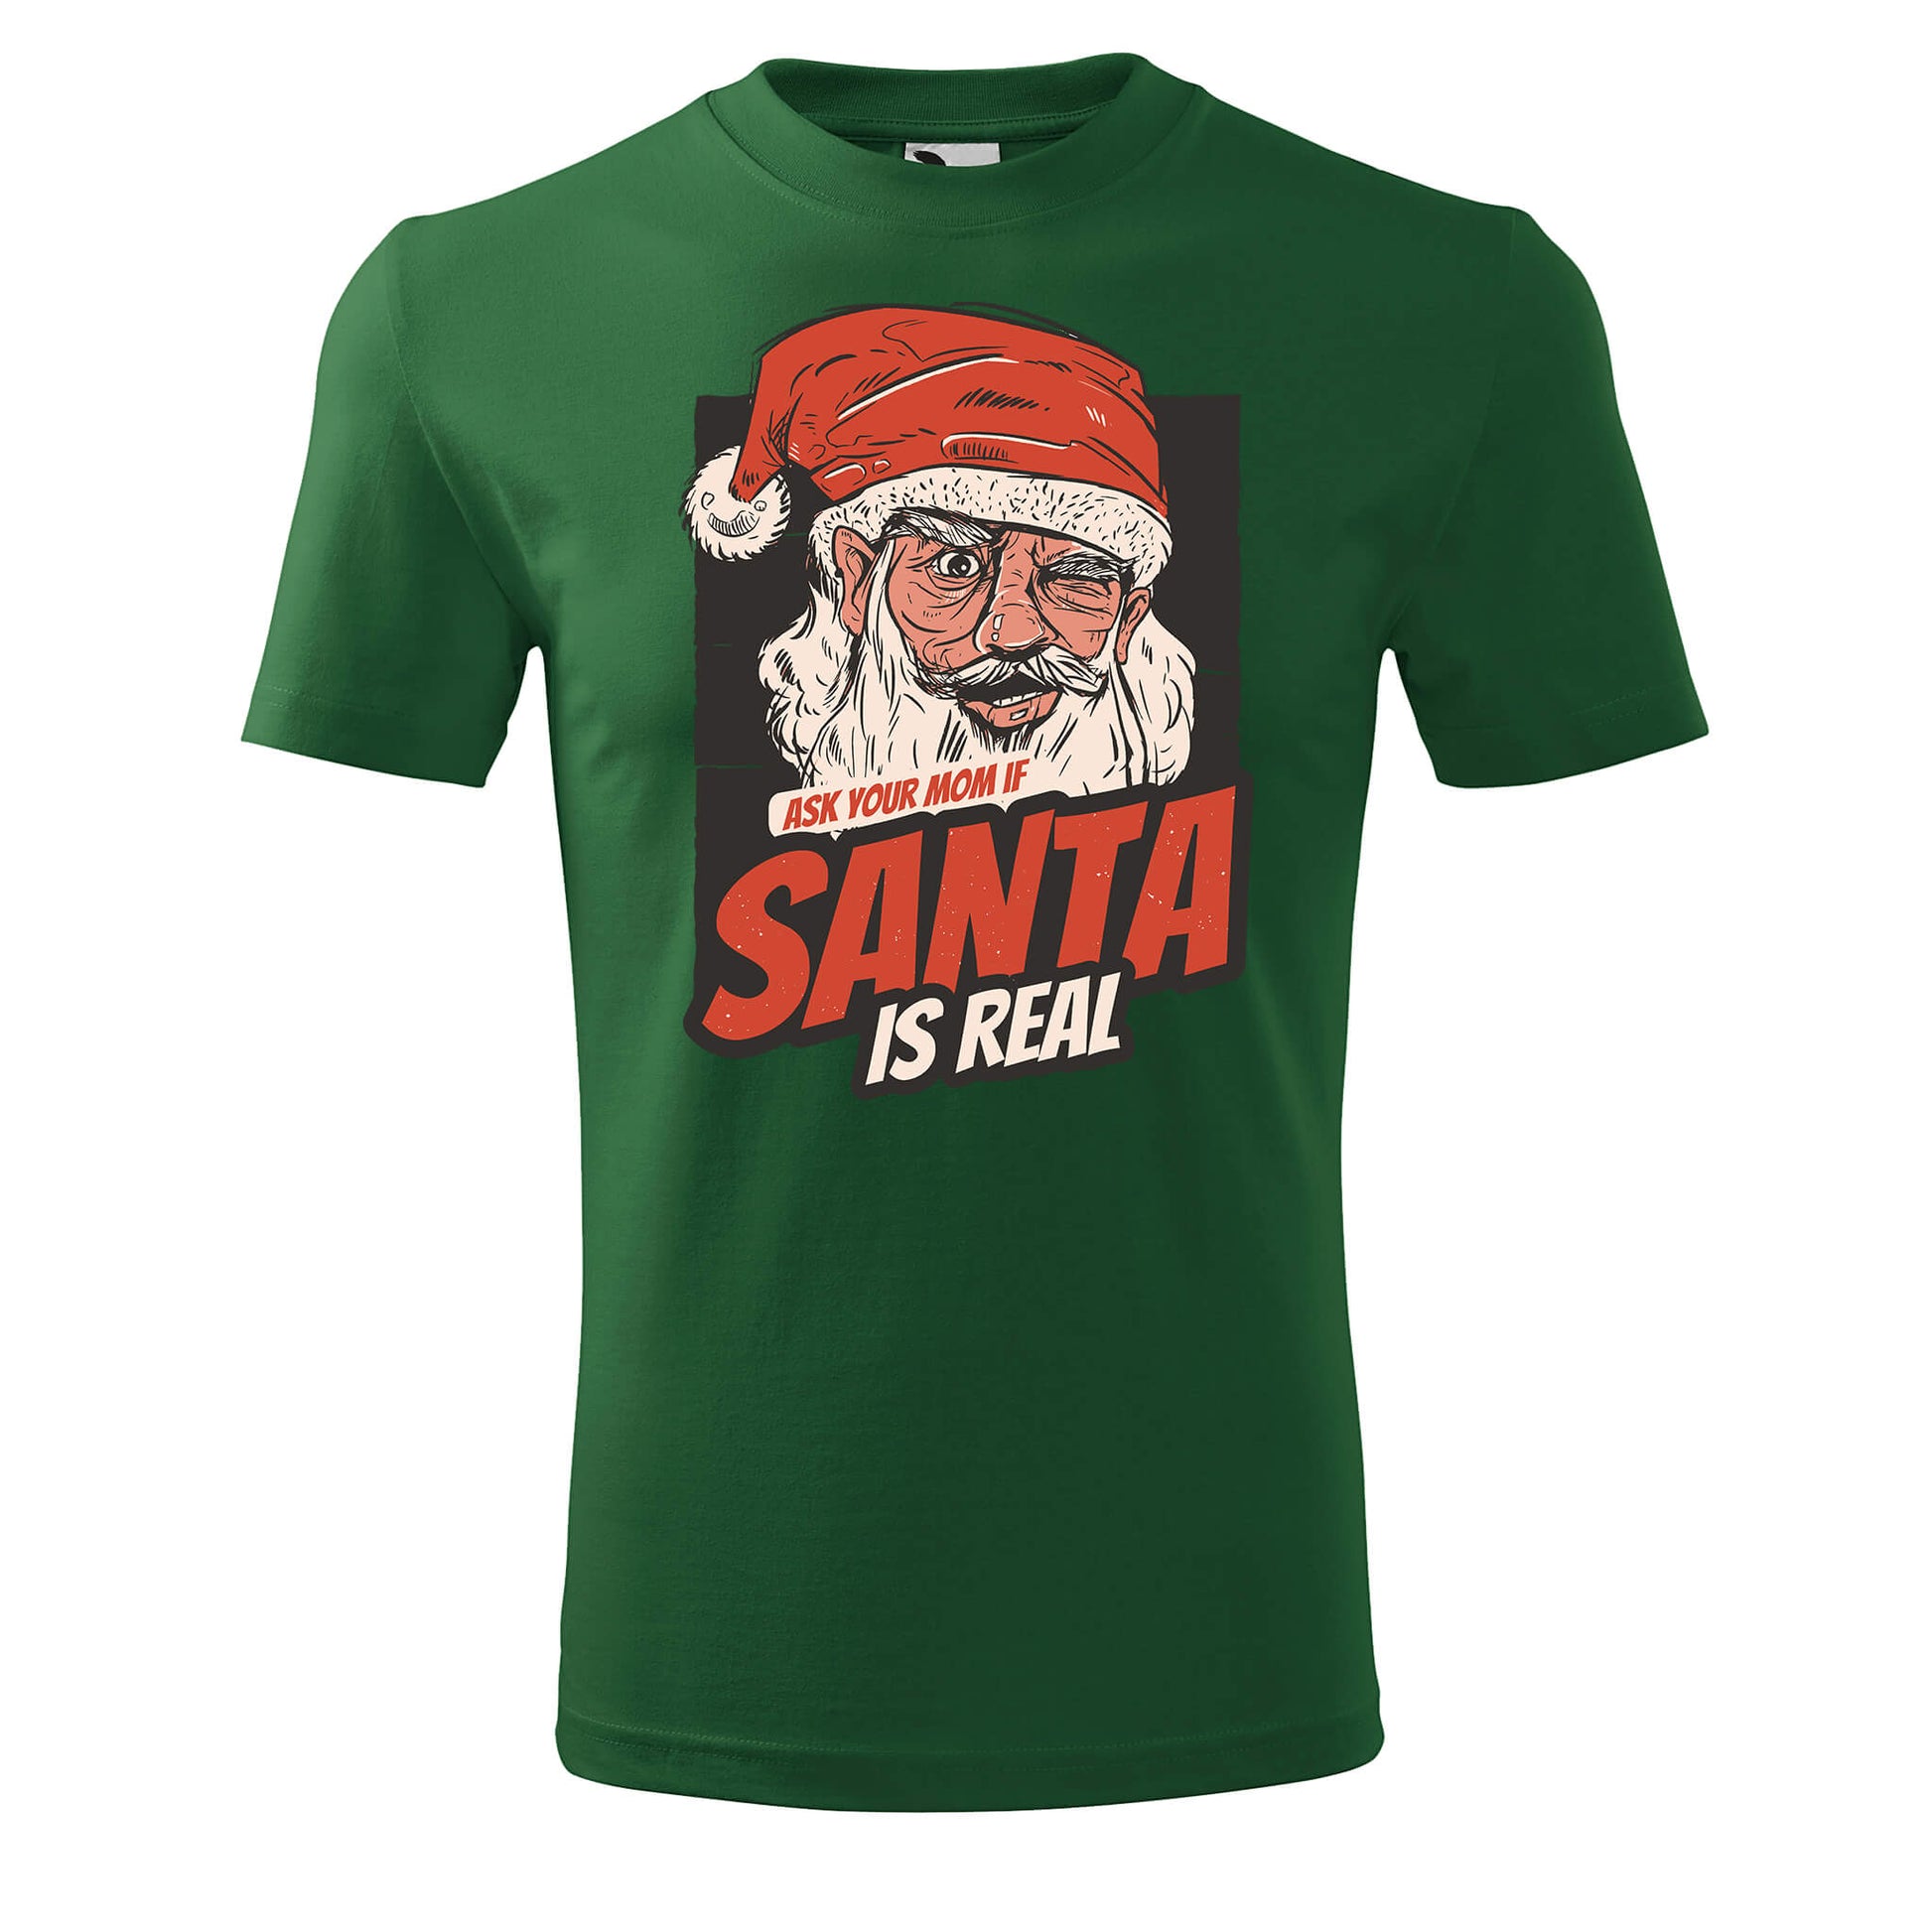 Ask your mom if santa is real t-shirt - rvdesignprint